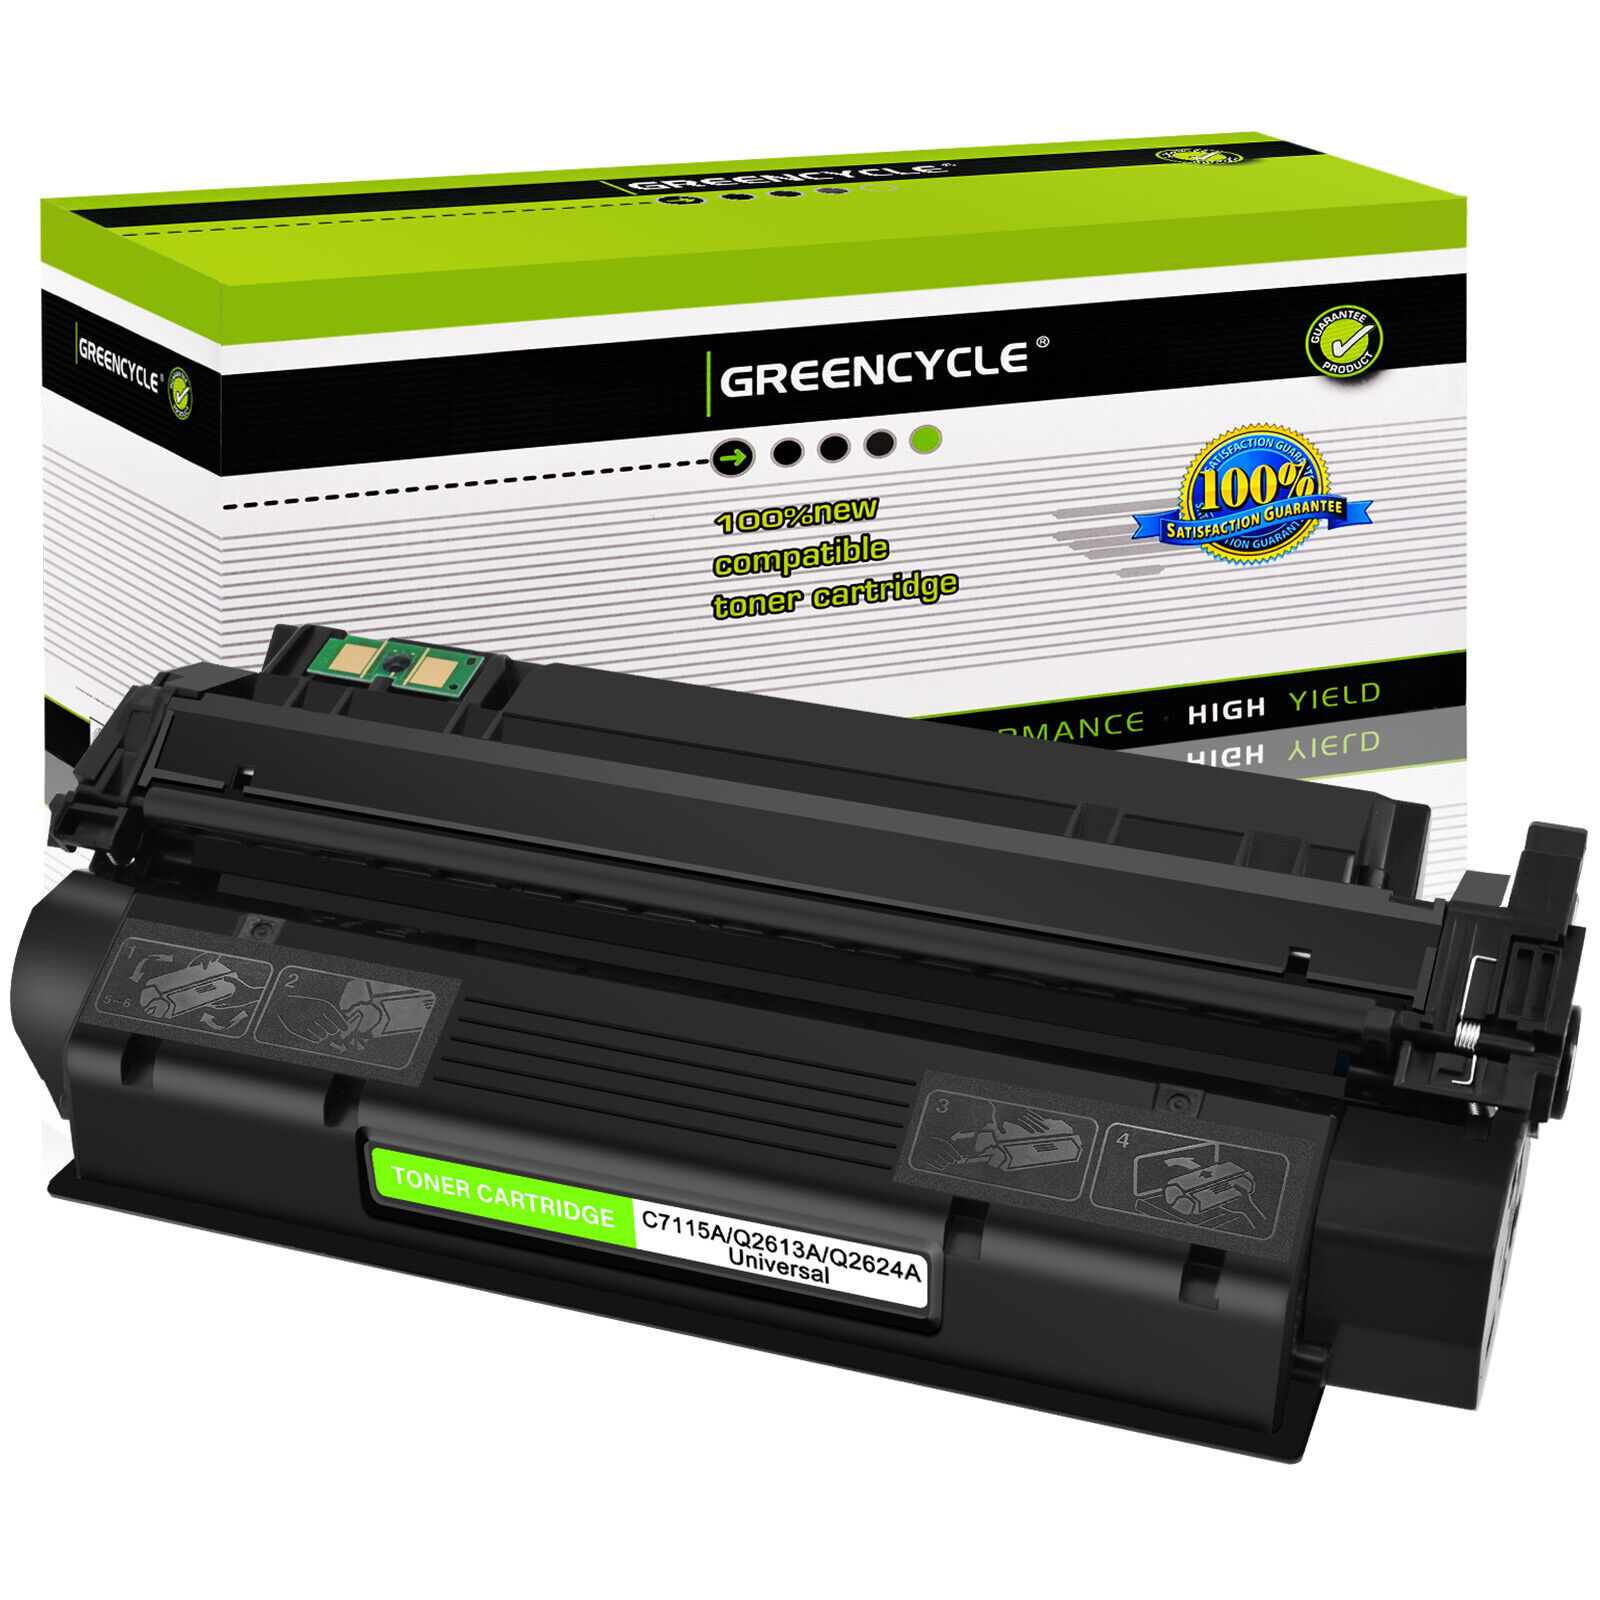 GREENCYCLE C7115A 15A Toner Cartridge for HP LaserJet 1000 1200 1220 3310 3320n